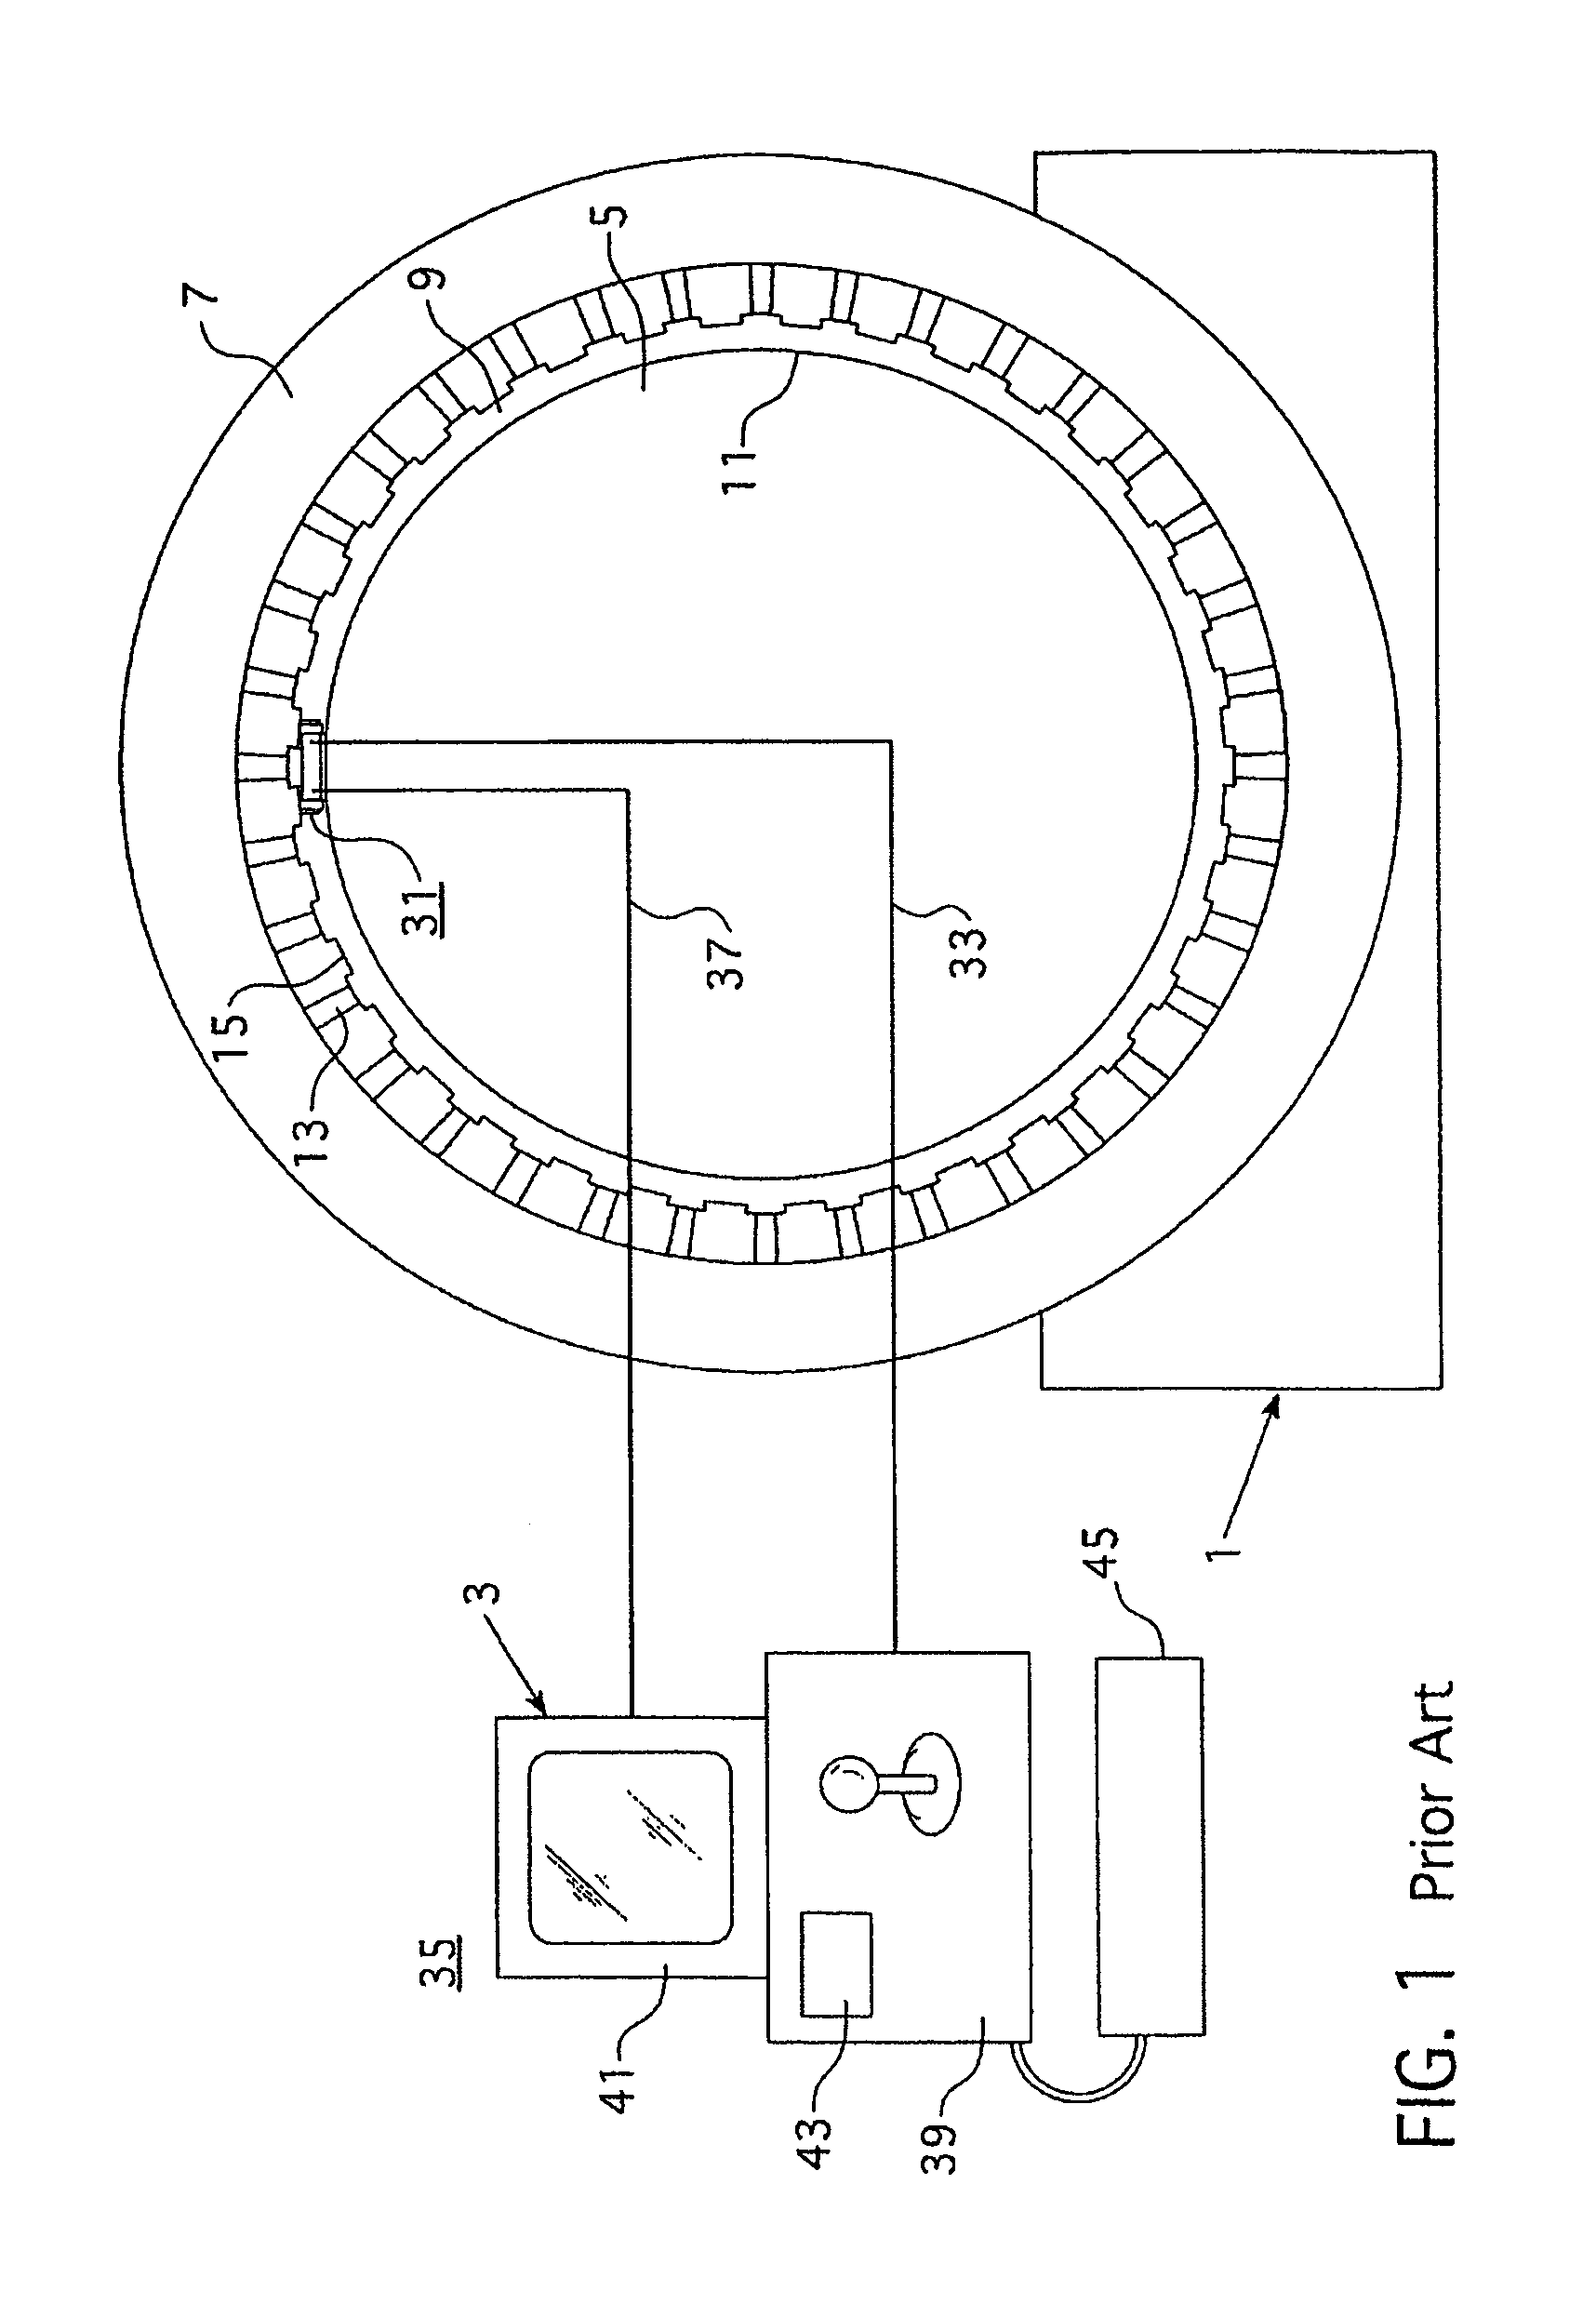 Apparatus for impact testing for electric generator stator wedge tightness